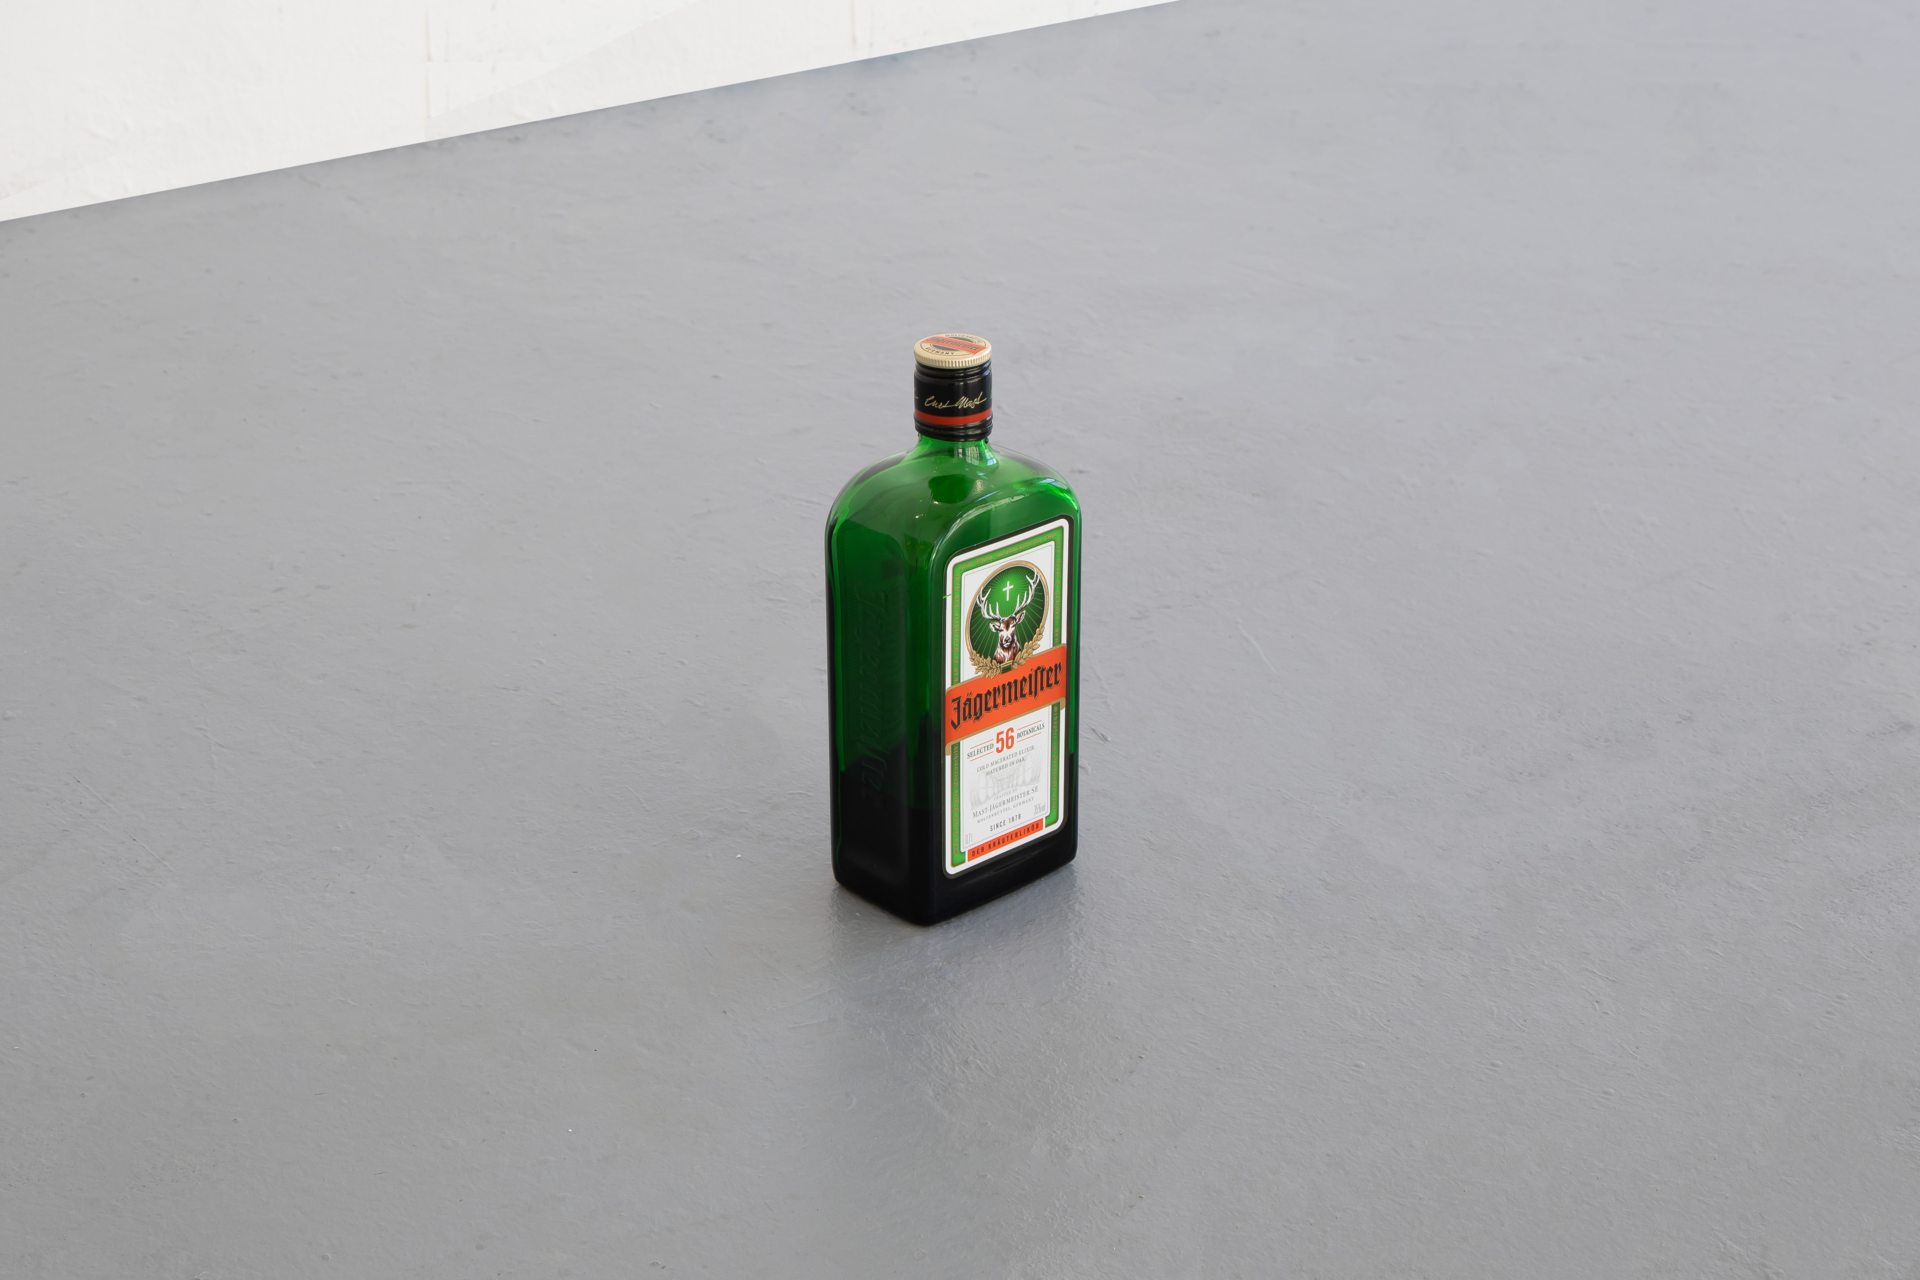 Hugo Bausch Belbachir, The Things I Know For Sure (Valentine’s Day), 2022, Jägermeister bottle, variable dimensions